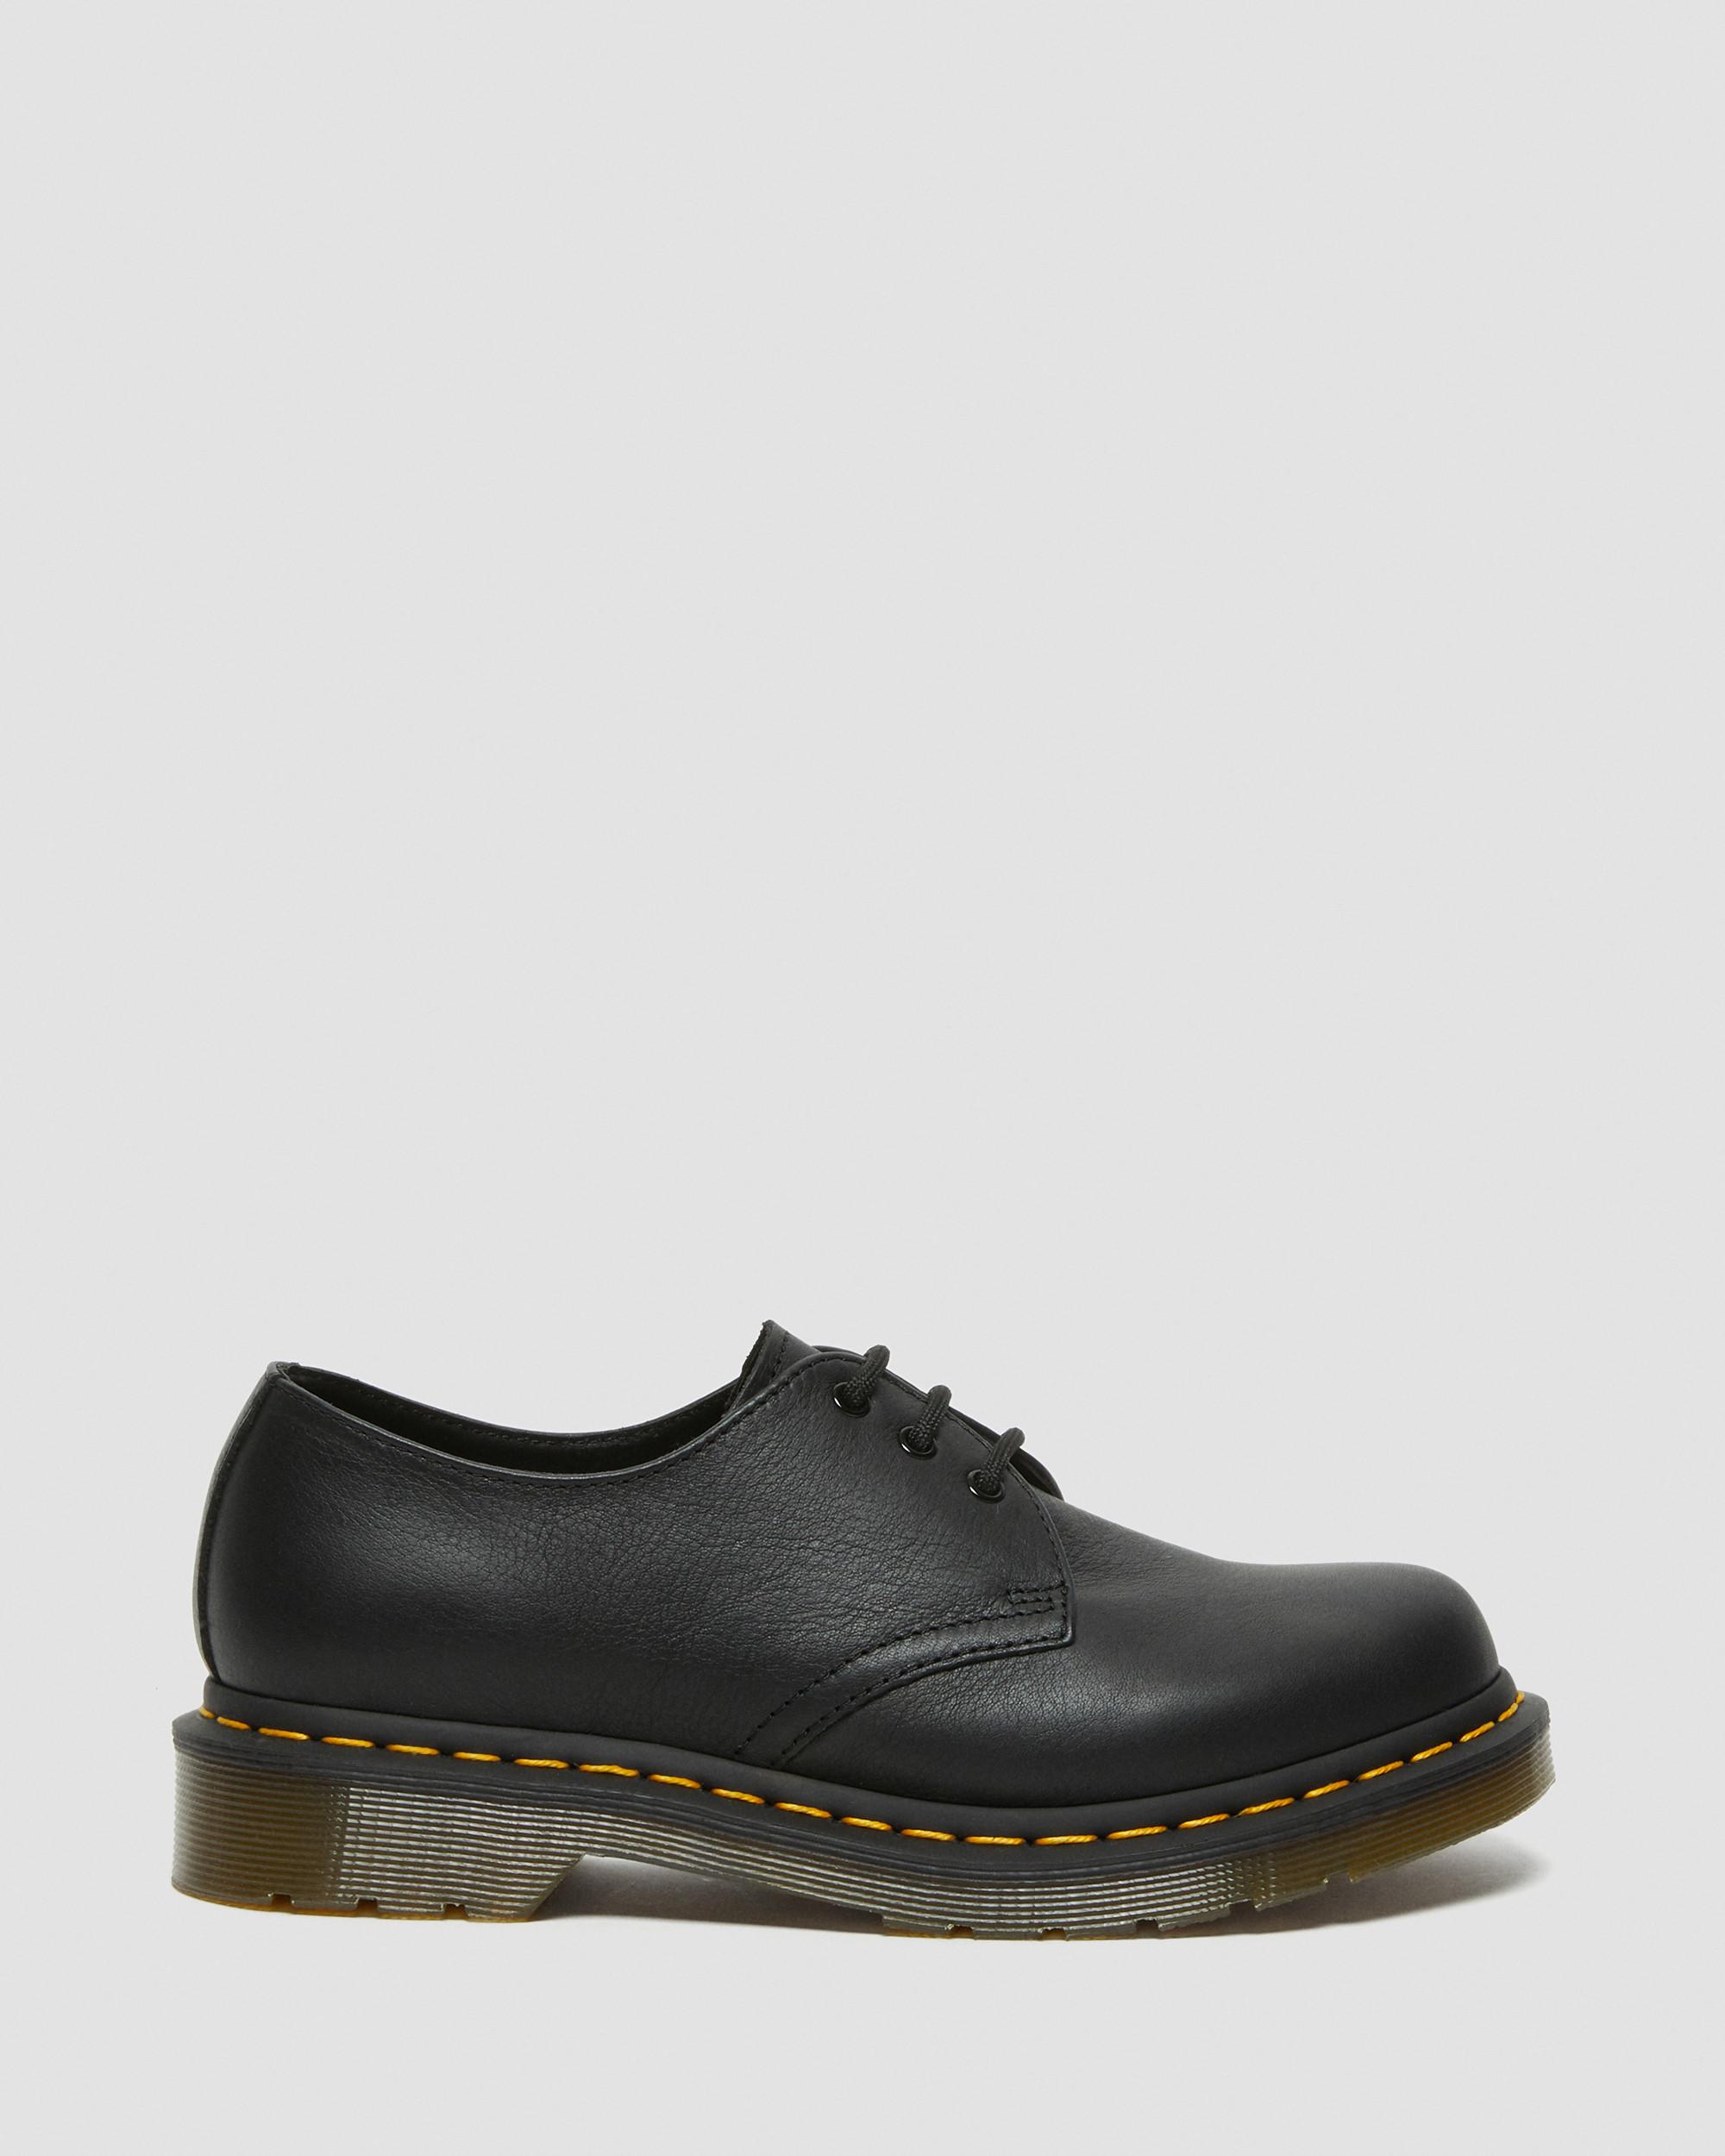 DR MARTENS 1461 Women's Virginia Leather Oxford Shoes